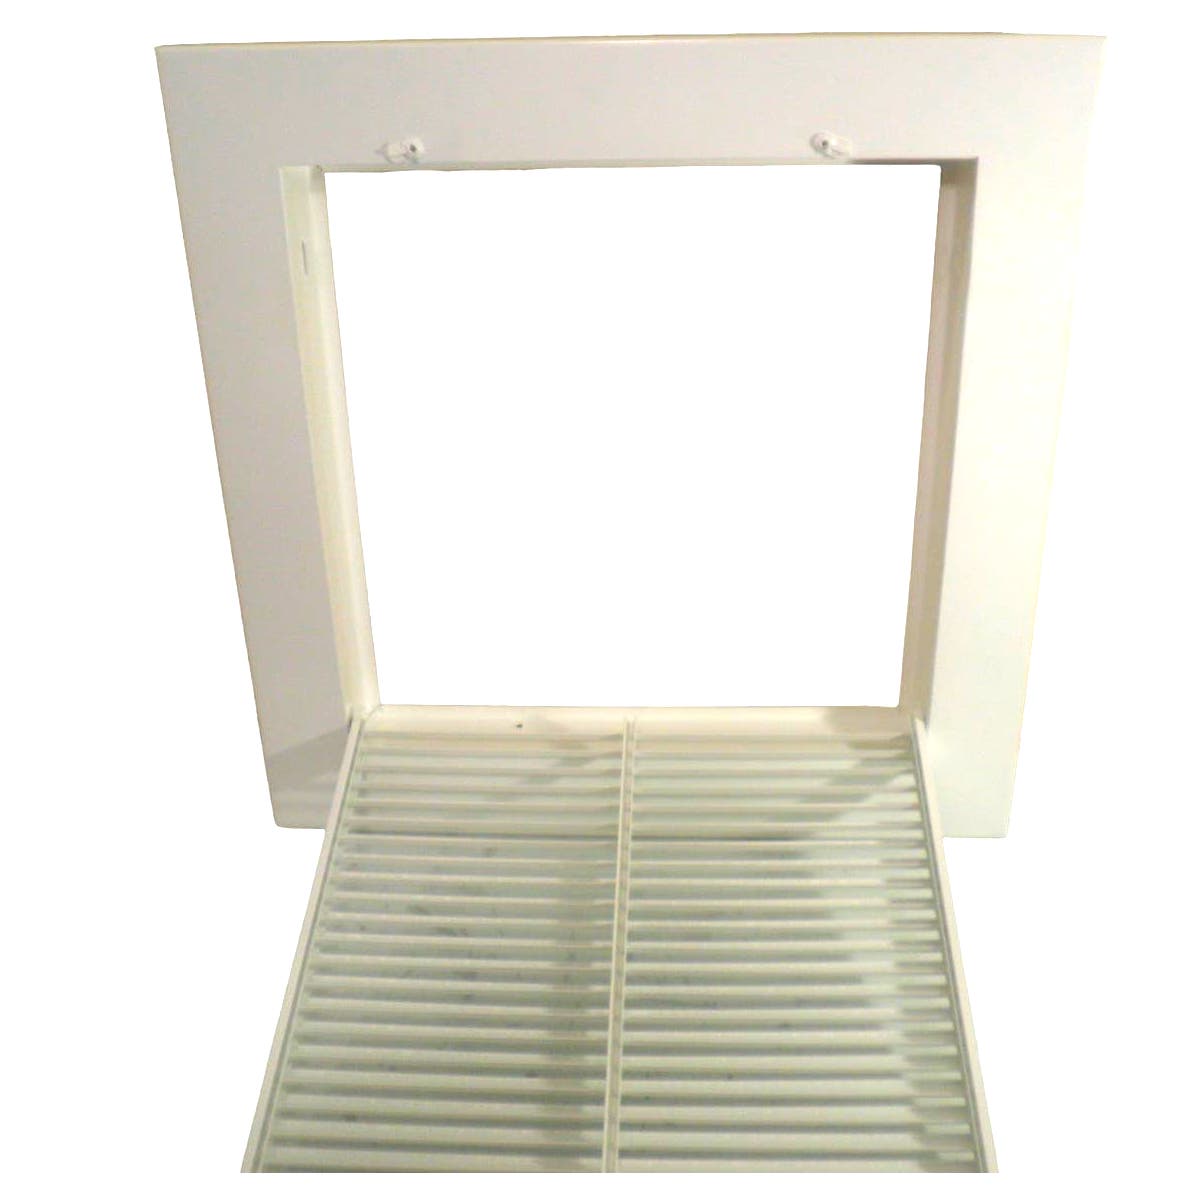 CS/2 18" X 18" ALUMINUM RETURN FILTER GRILLE FOR 1" FILTER - LINEAR BAR GRILLES [Local Pickup in Cropwell, AL 35054 $25]